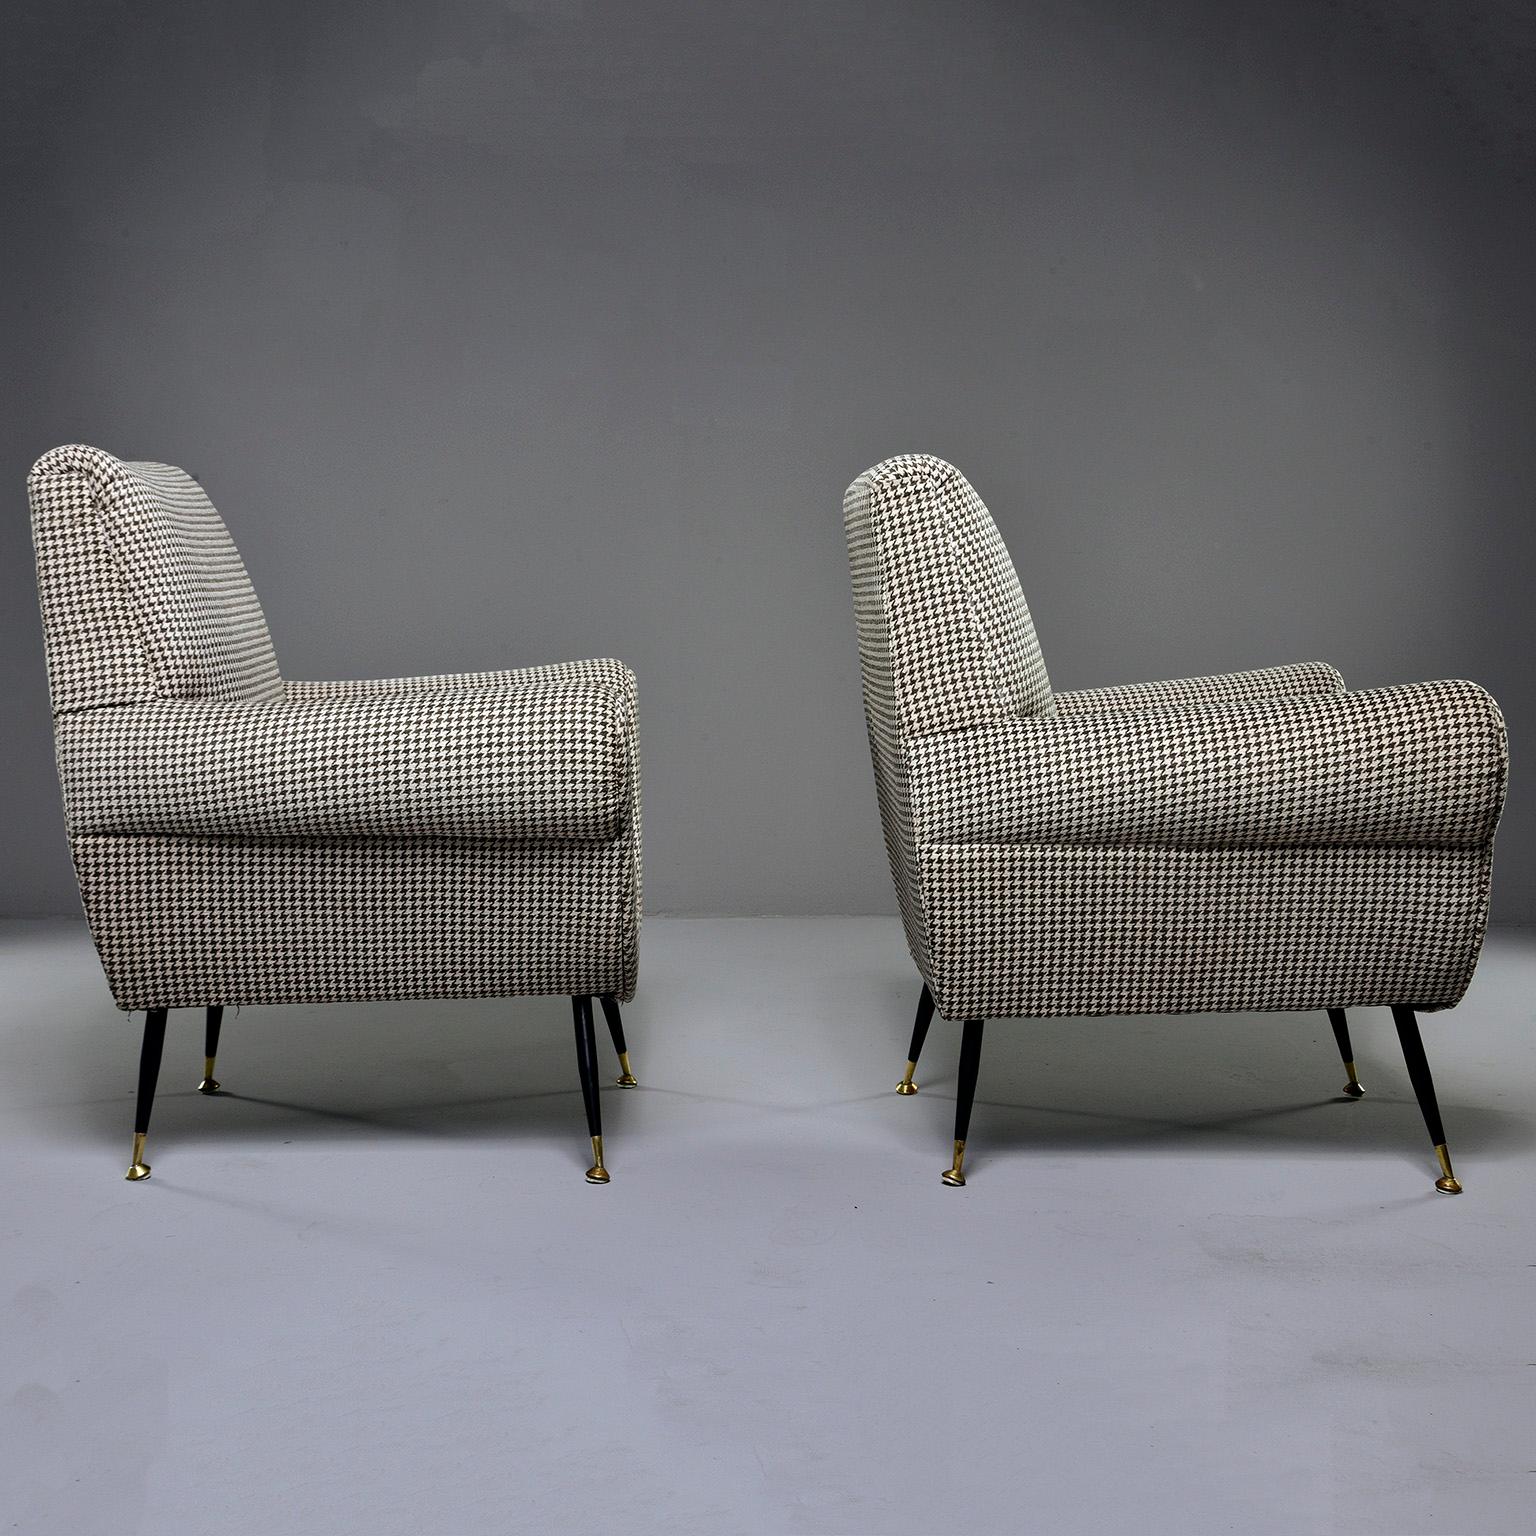 Italian Pair of Newly Upholstered Chairs by Gigi Radice for Minotti